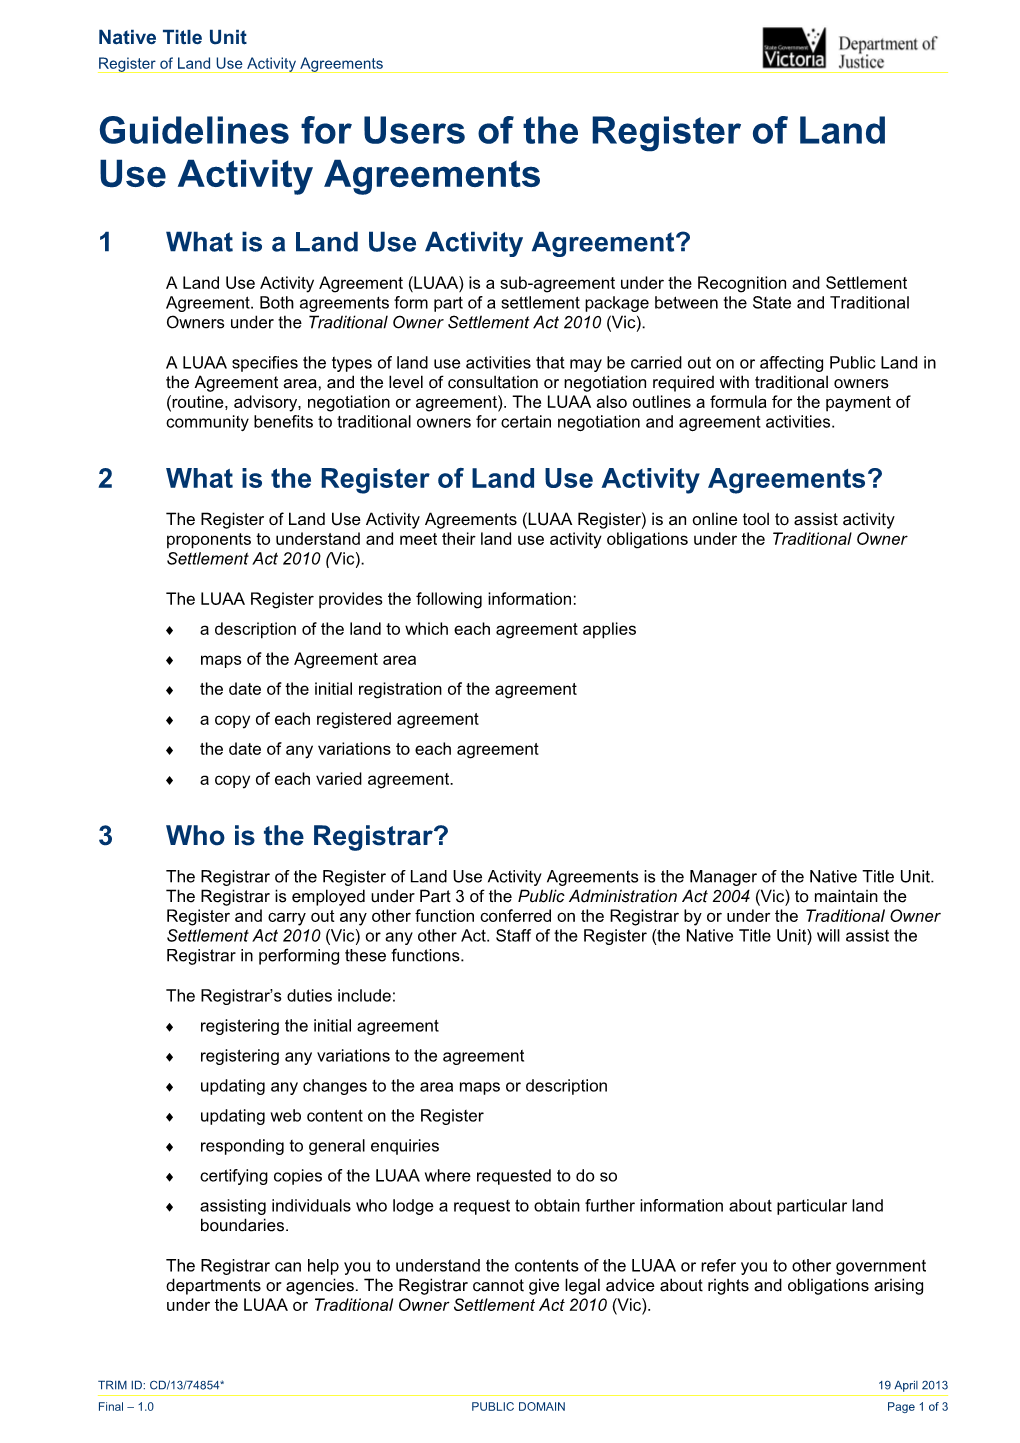 Guidelines for Users of the Register of Land Use Activity Agreements